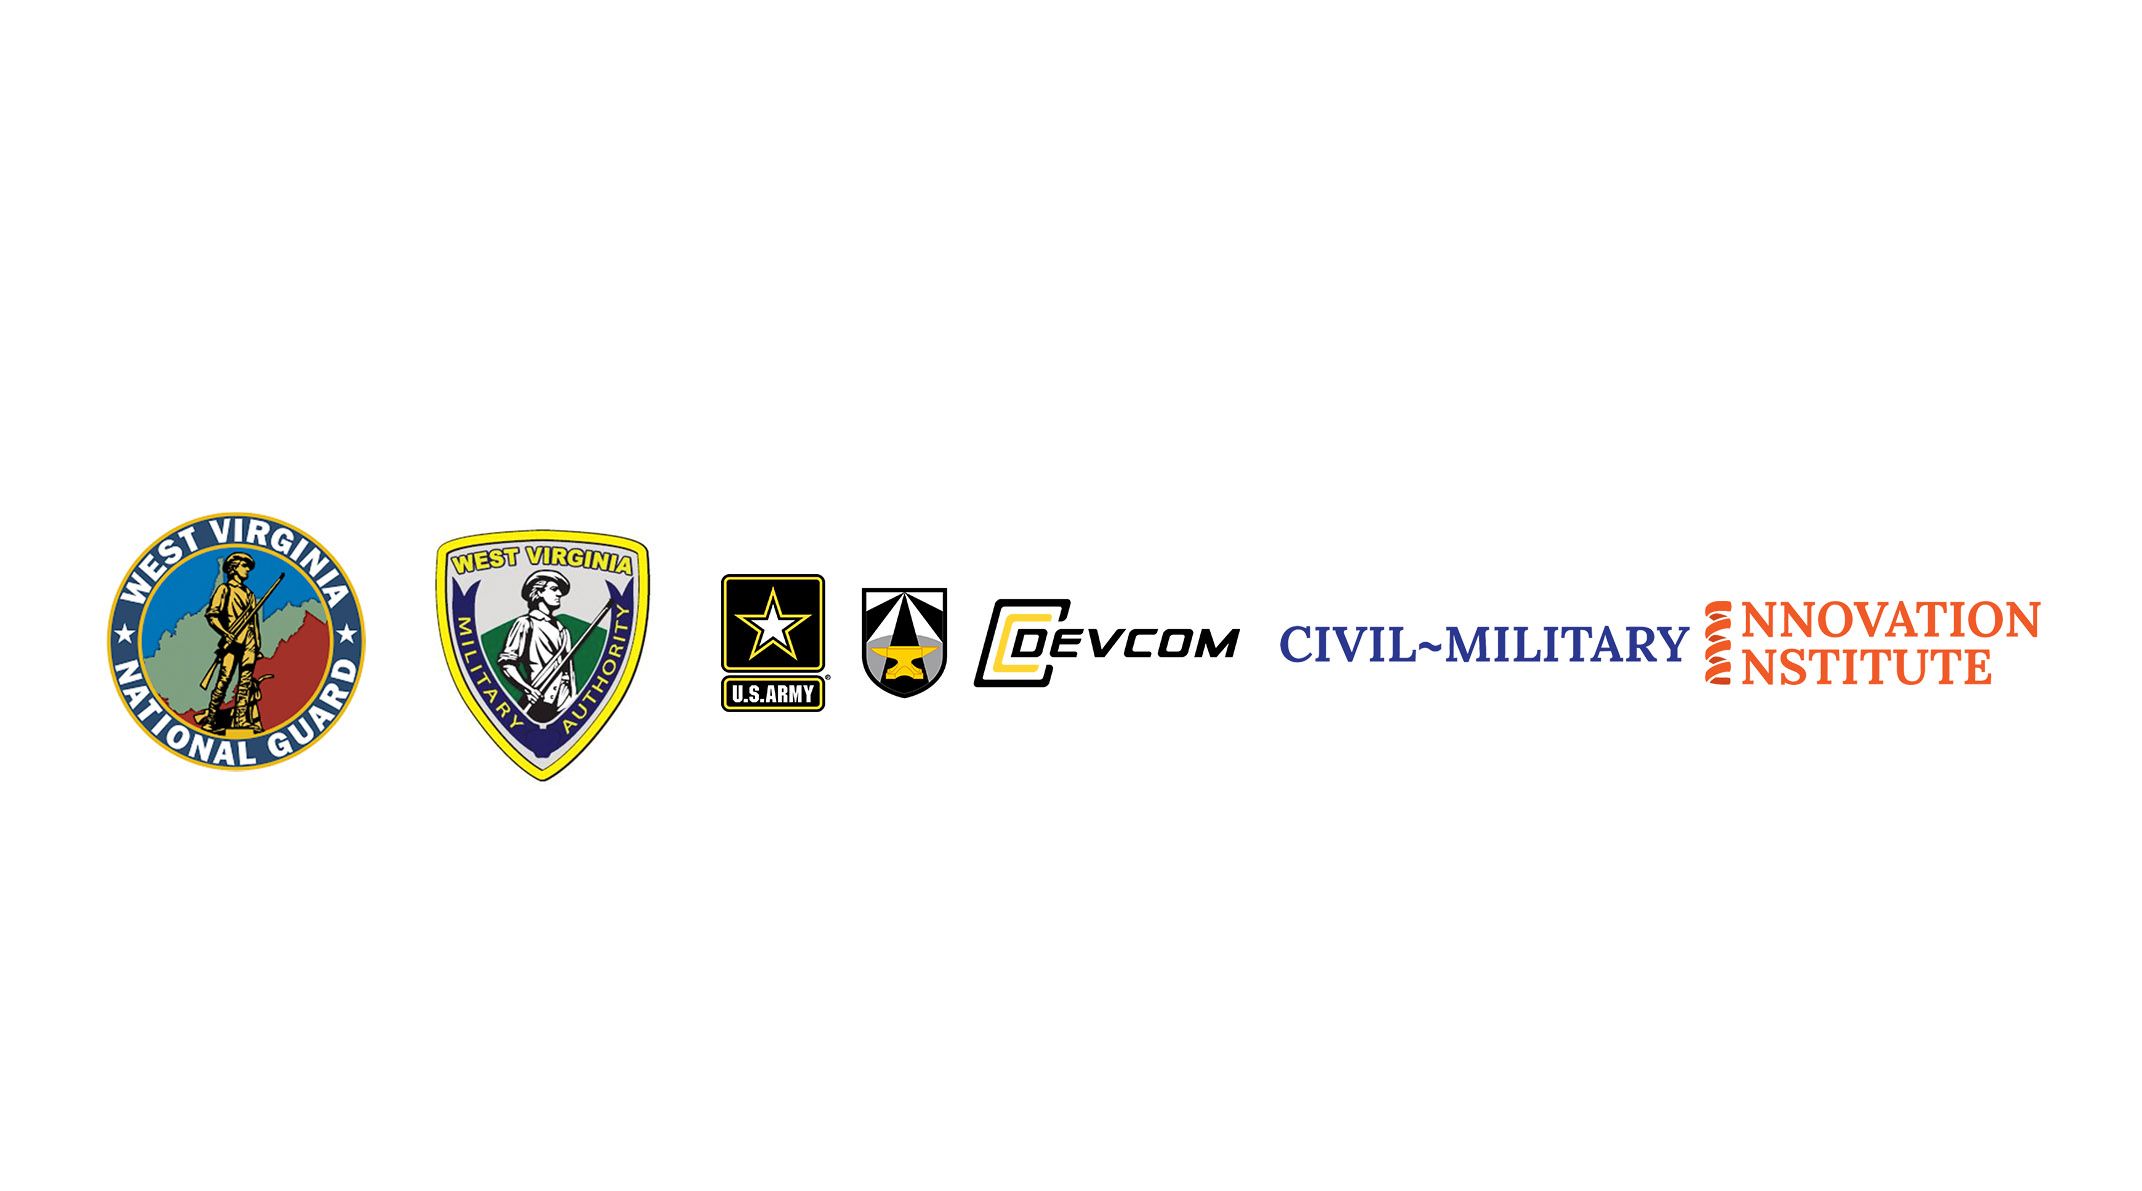 West Virginia Military Authority, Army sign agreement to create solutions to technology challenges